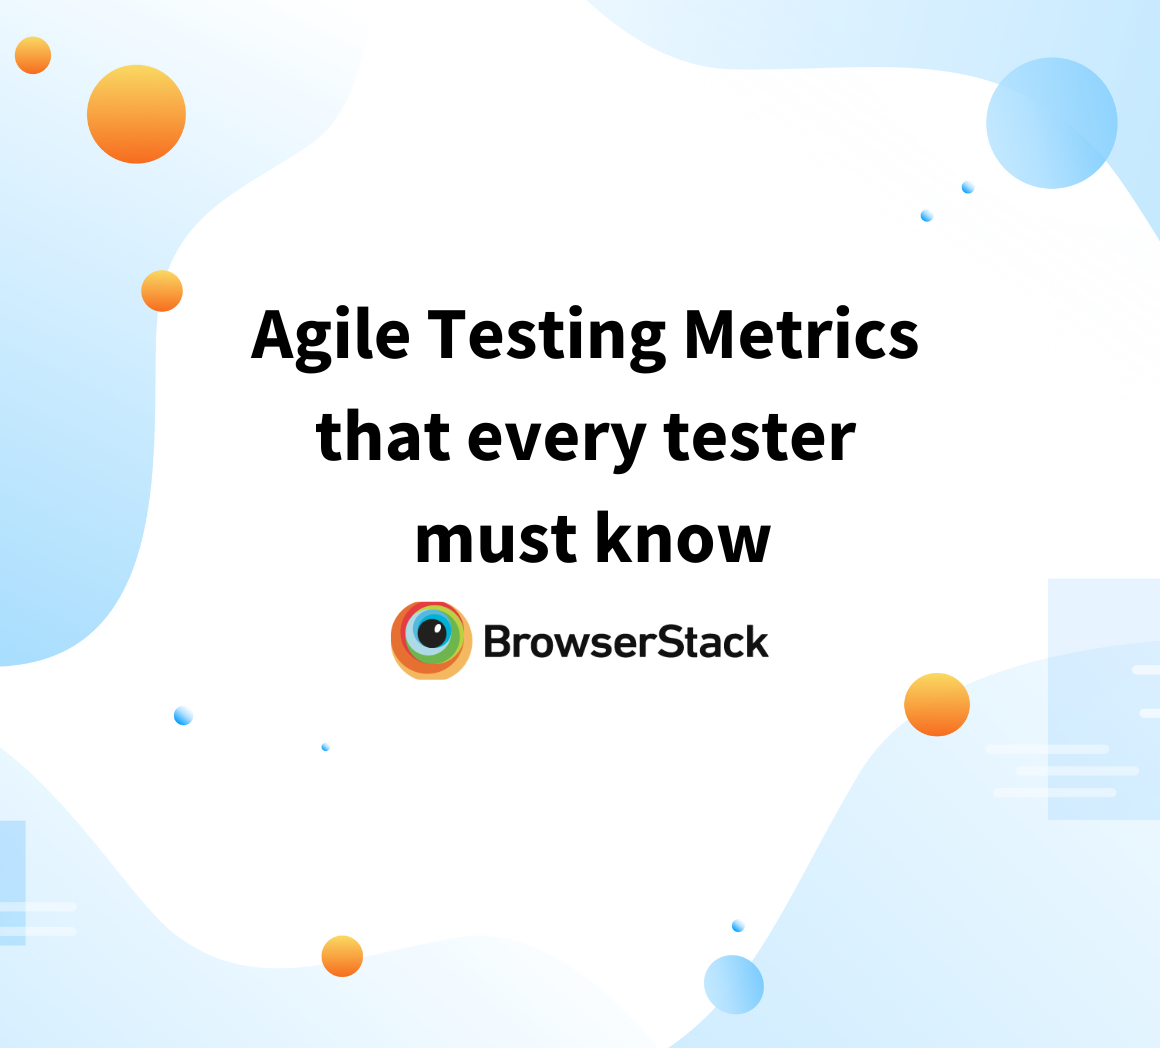 Agile Testing Metrics that every tester must know